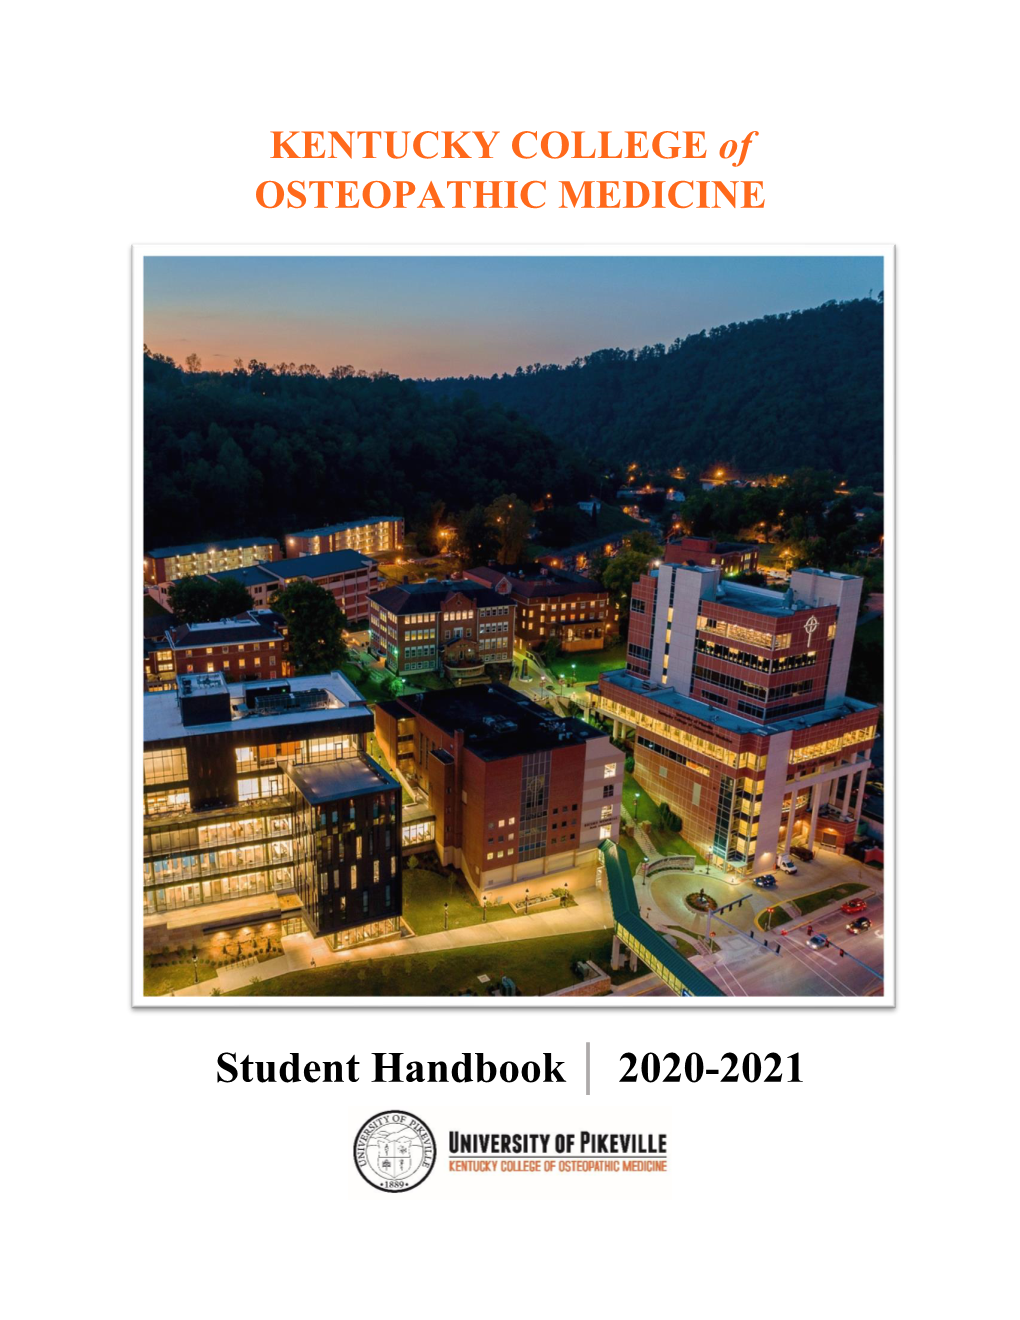 KYCOM Student Handbook, Osteopathic Pledge of Commitment, Osteopathic Oath, and the AOA Code of Ethics